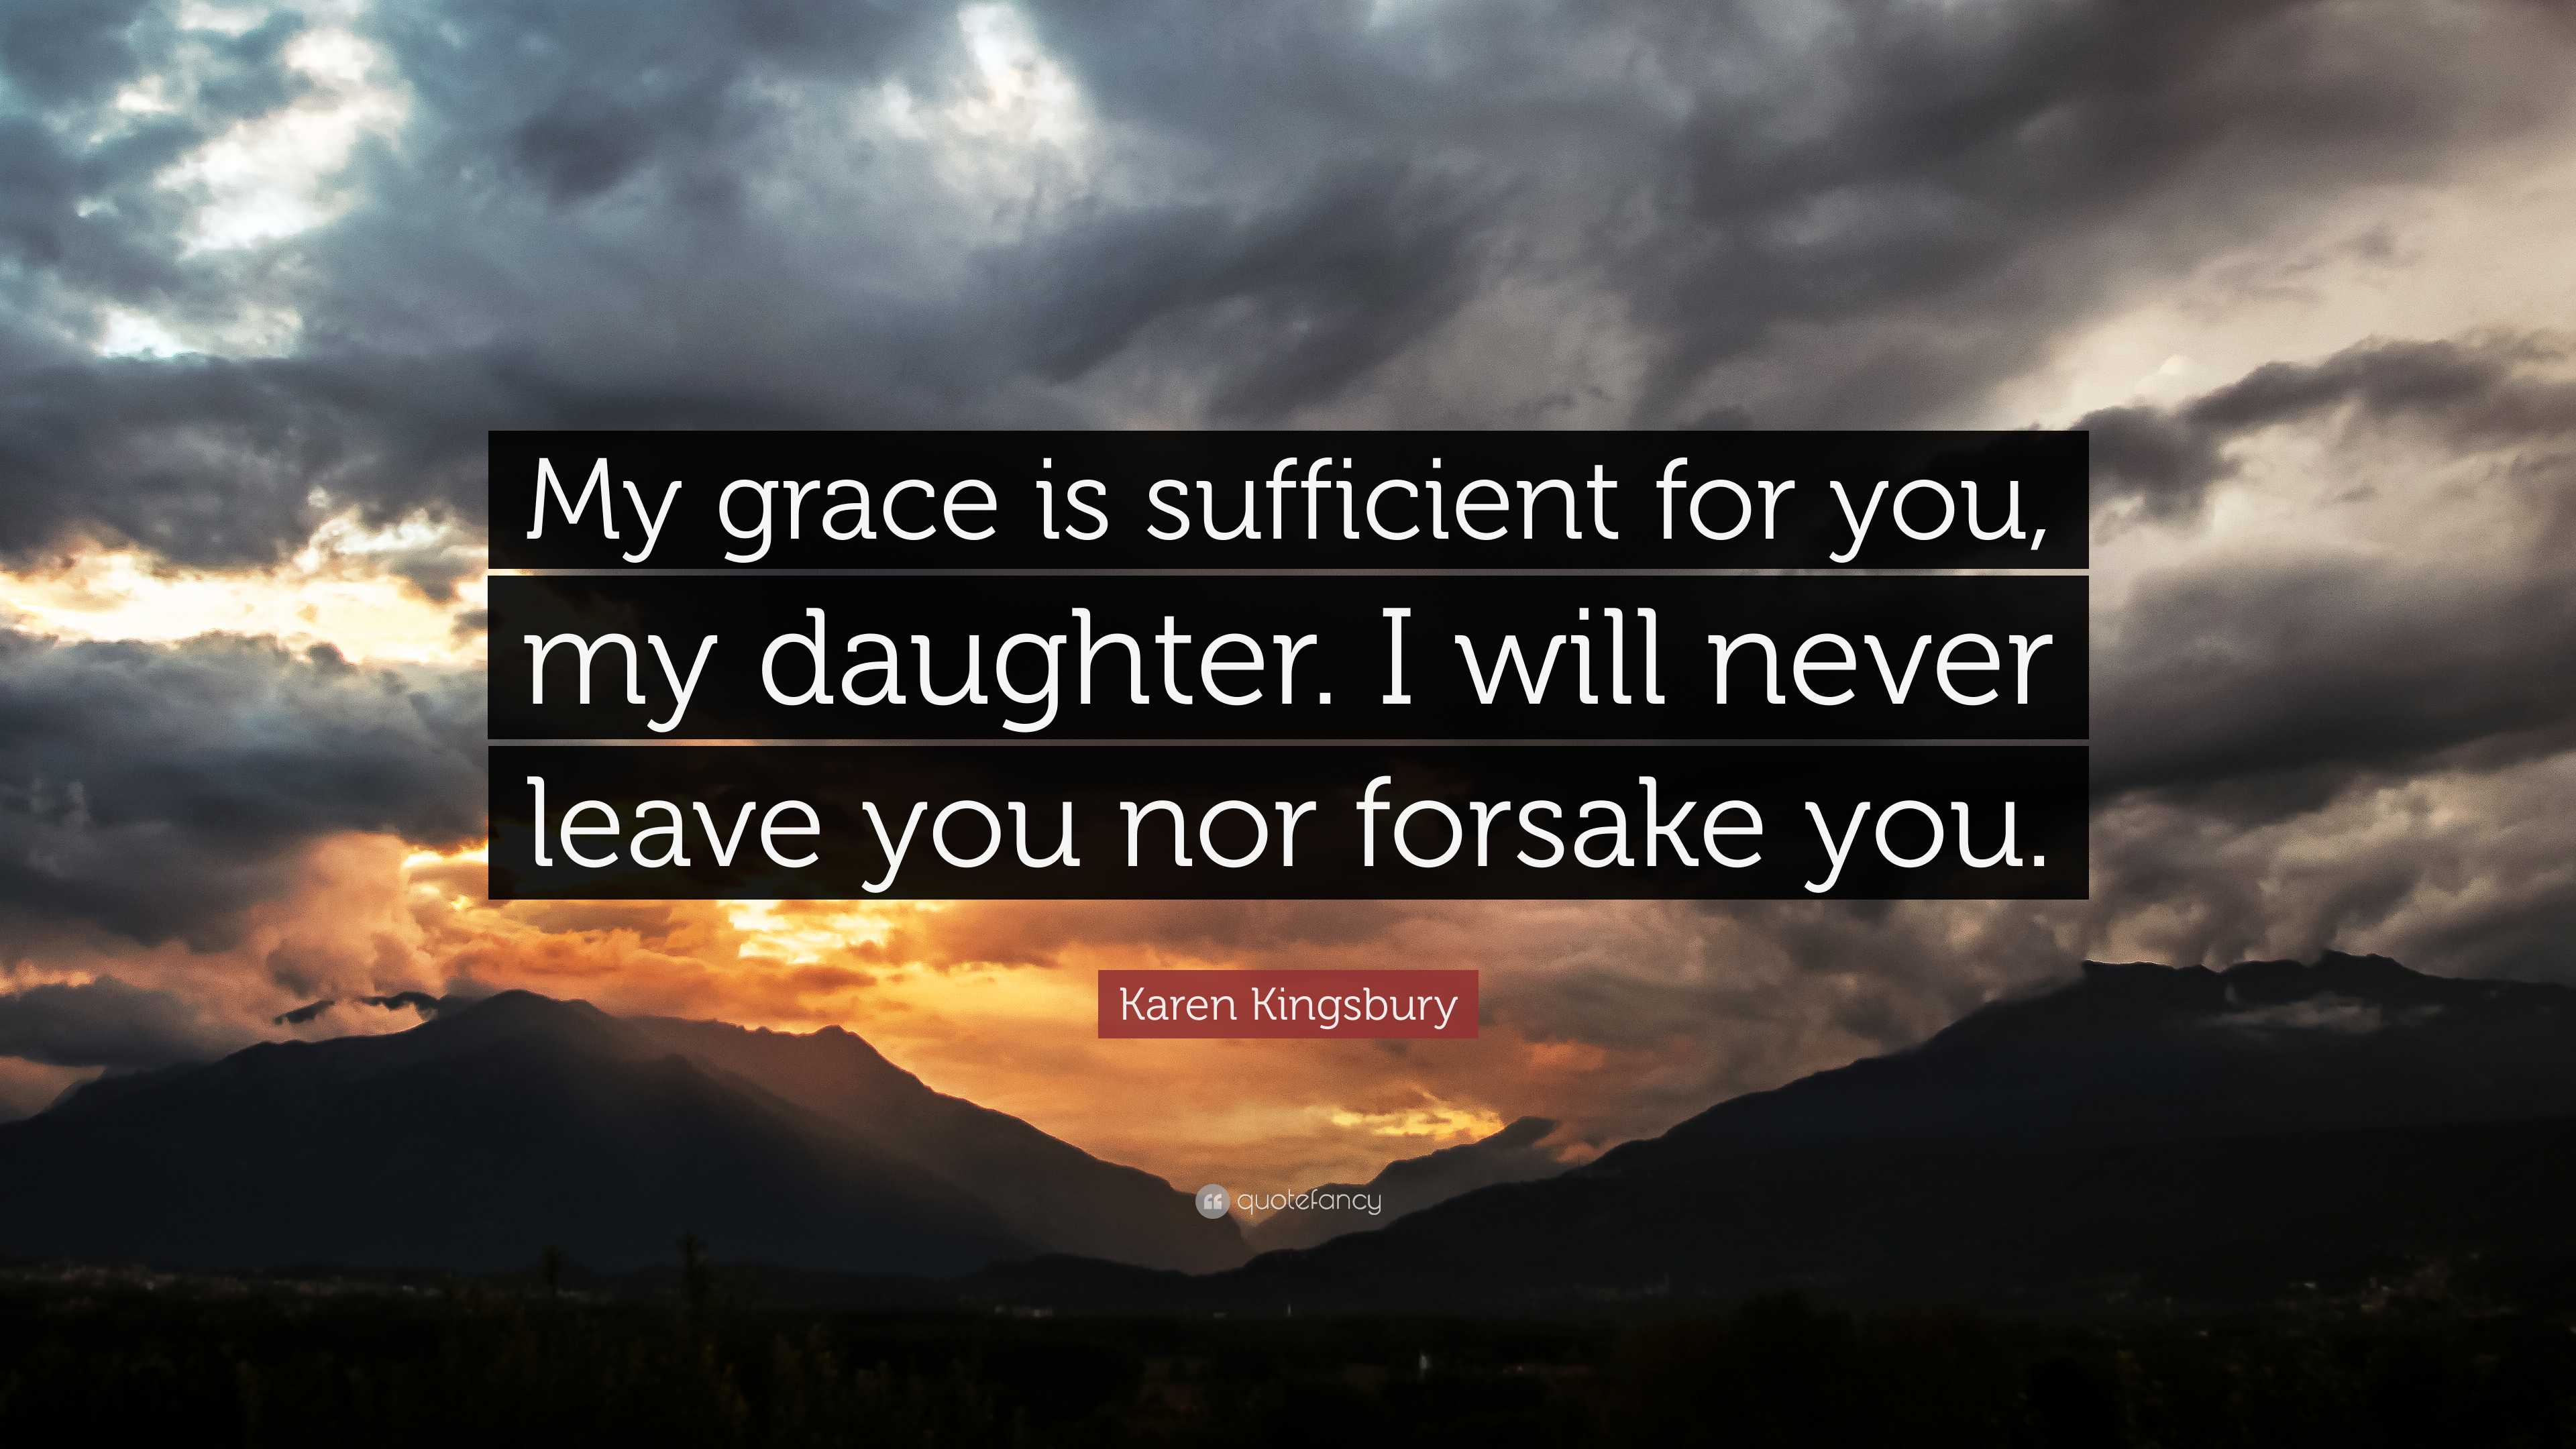 Karen Kingsbury Quote: “My grace is sufficient for you, my daughter. I ...